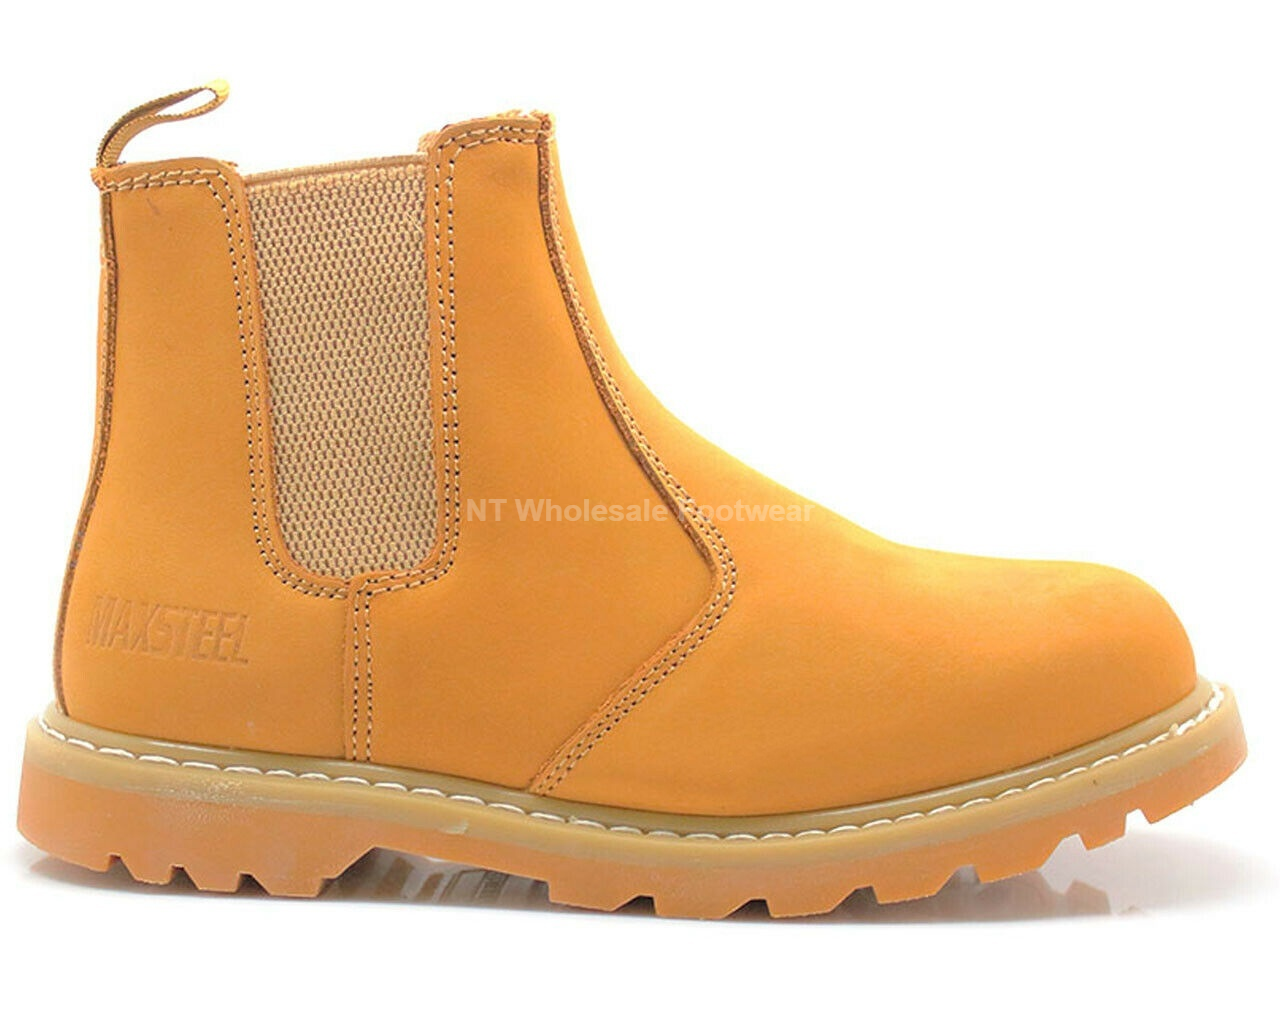 MENS GOOD YEAR WELTED CHELSEA DEALER ANKLE STEEL TOE CAP SAFETY WORK BOOTS SHOES 